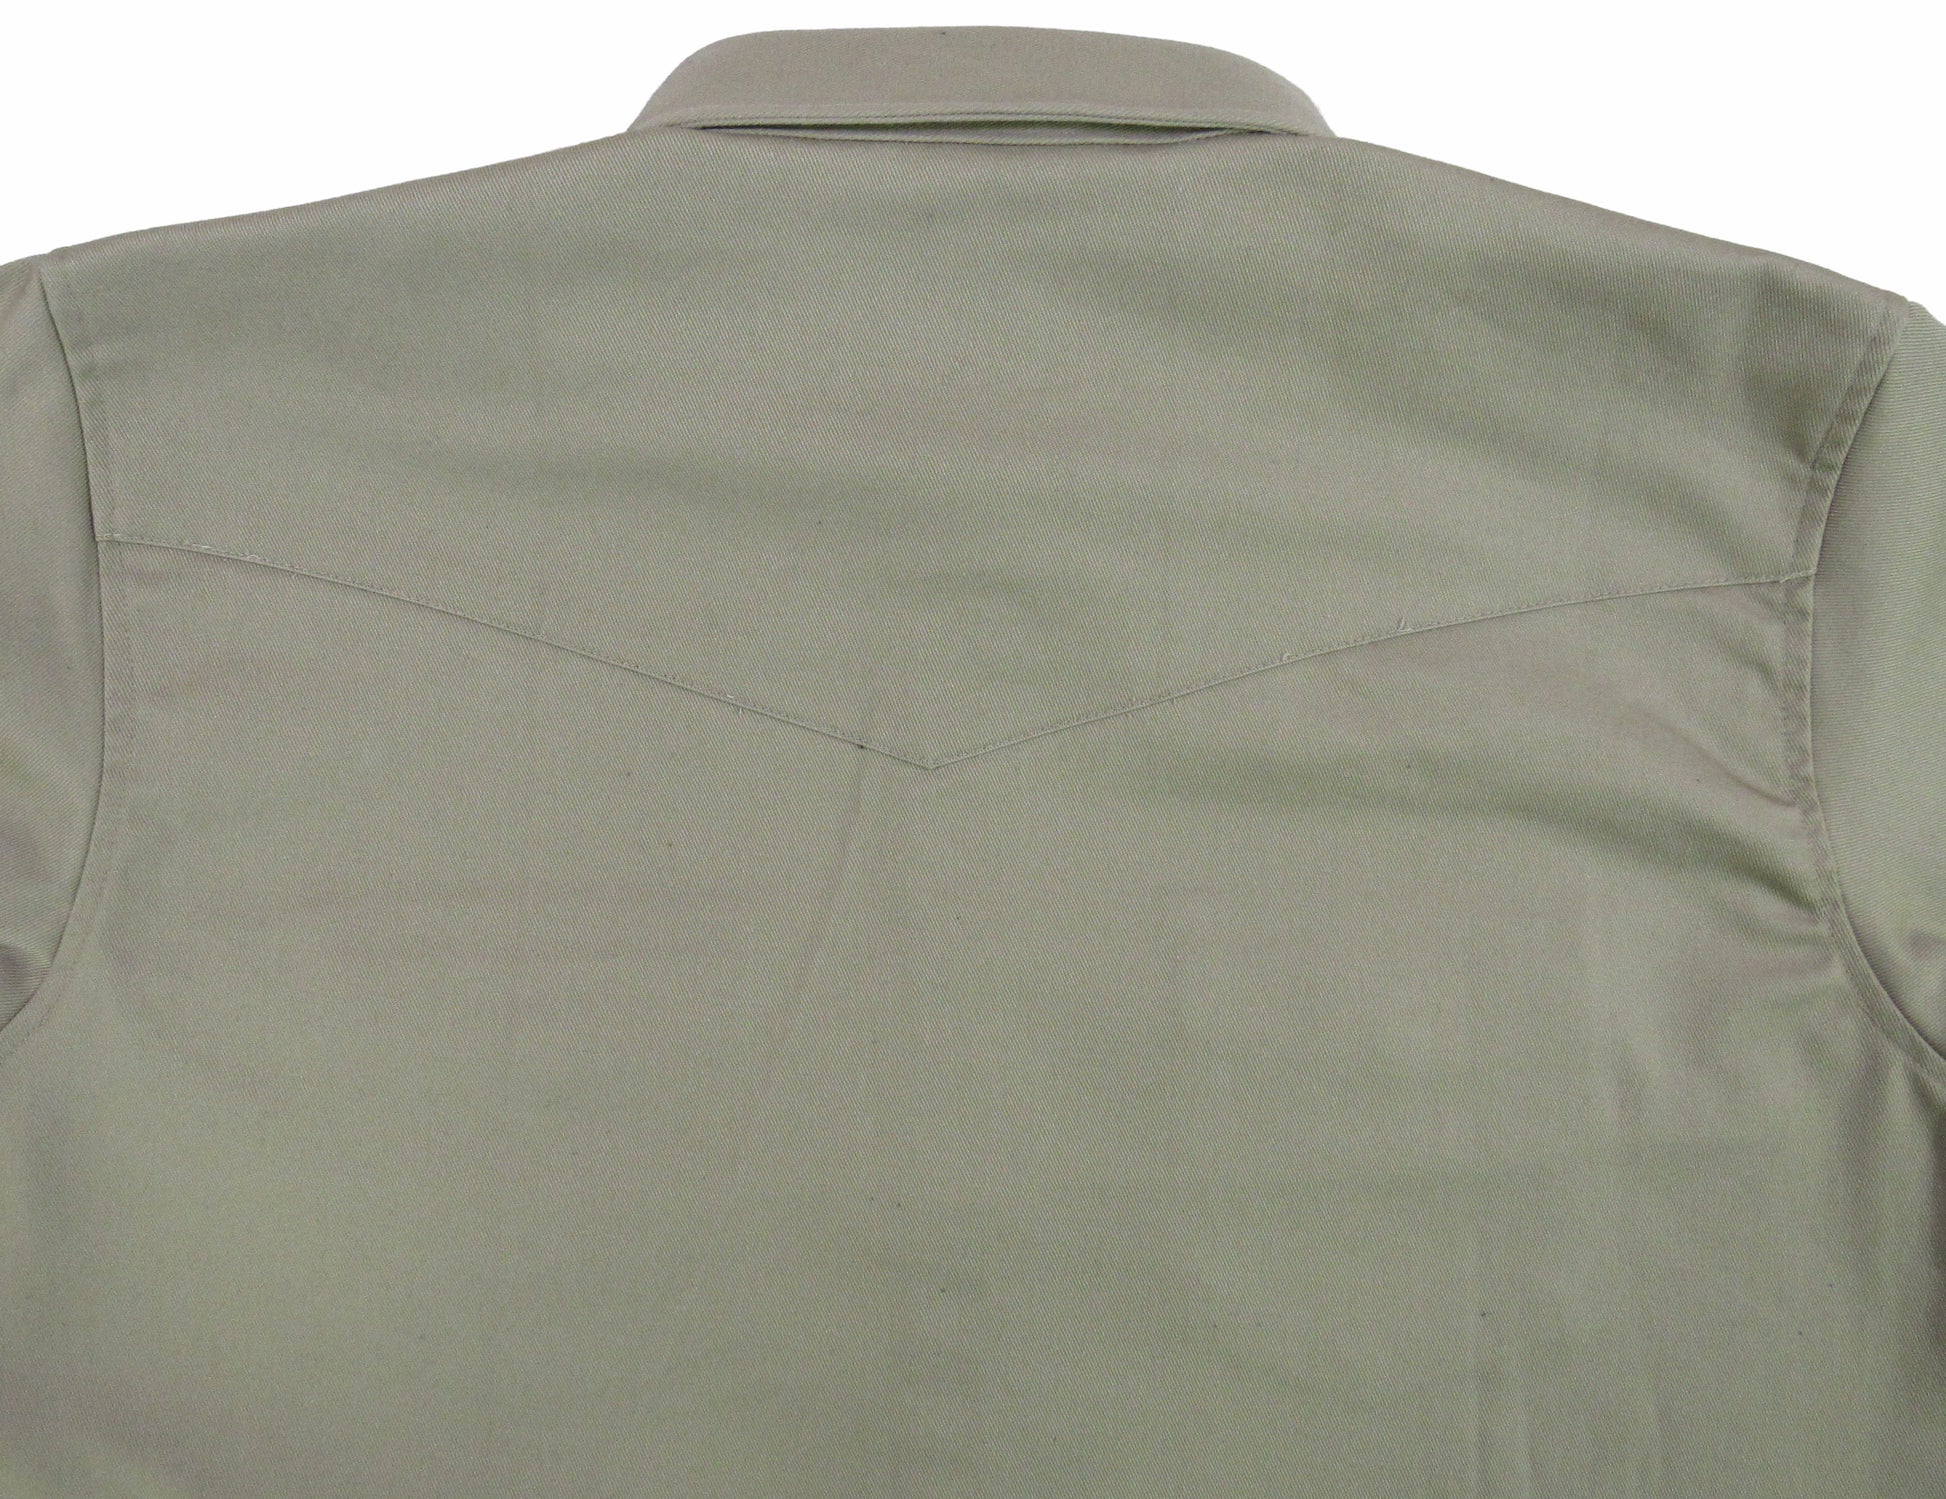 khaki twill shirt with snaps by Flying R Ranchwear Made in USA